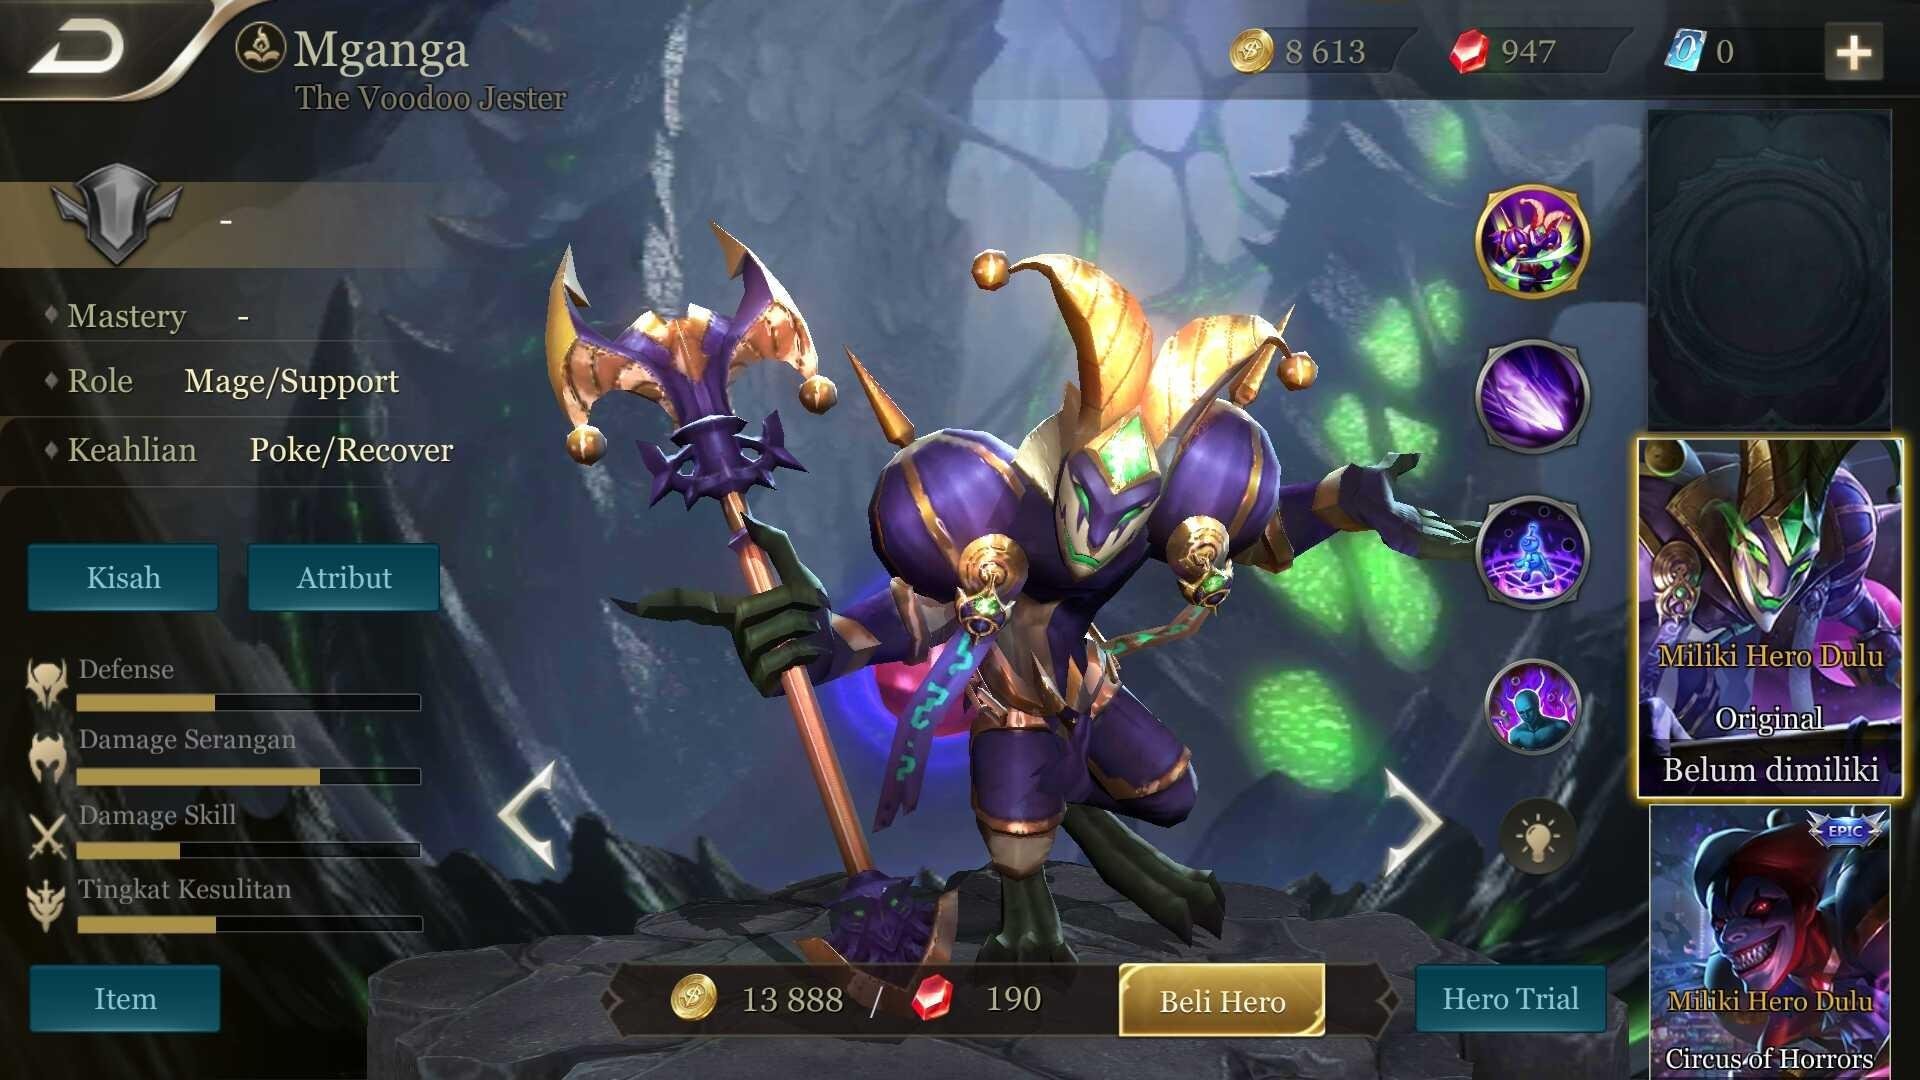 ARENA OF VALOR AOVGAME REVIEW: Mganga The Voodoo Jester 